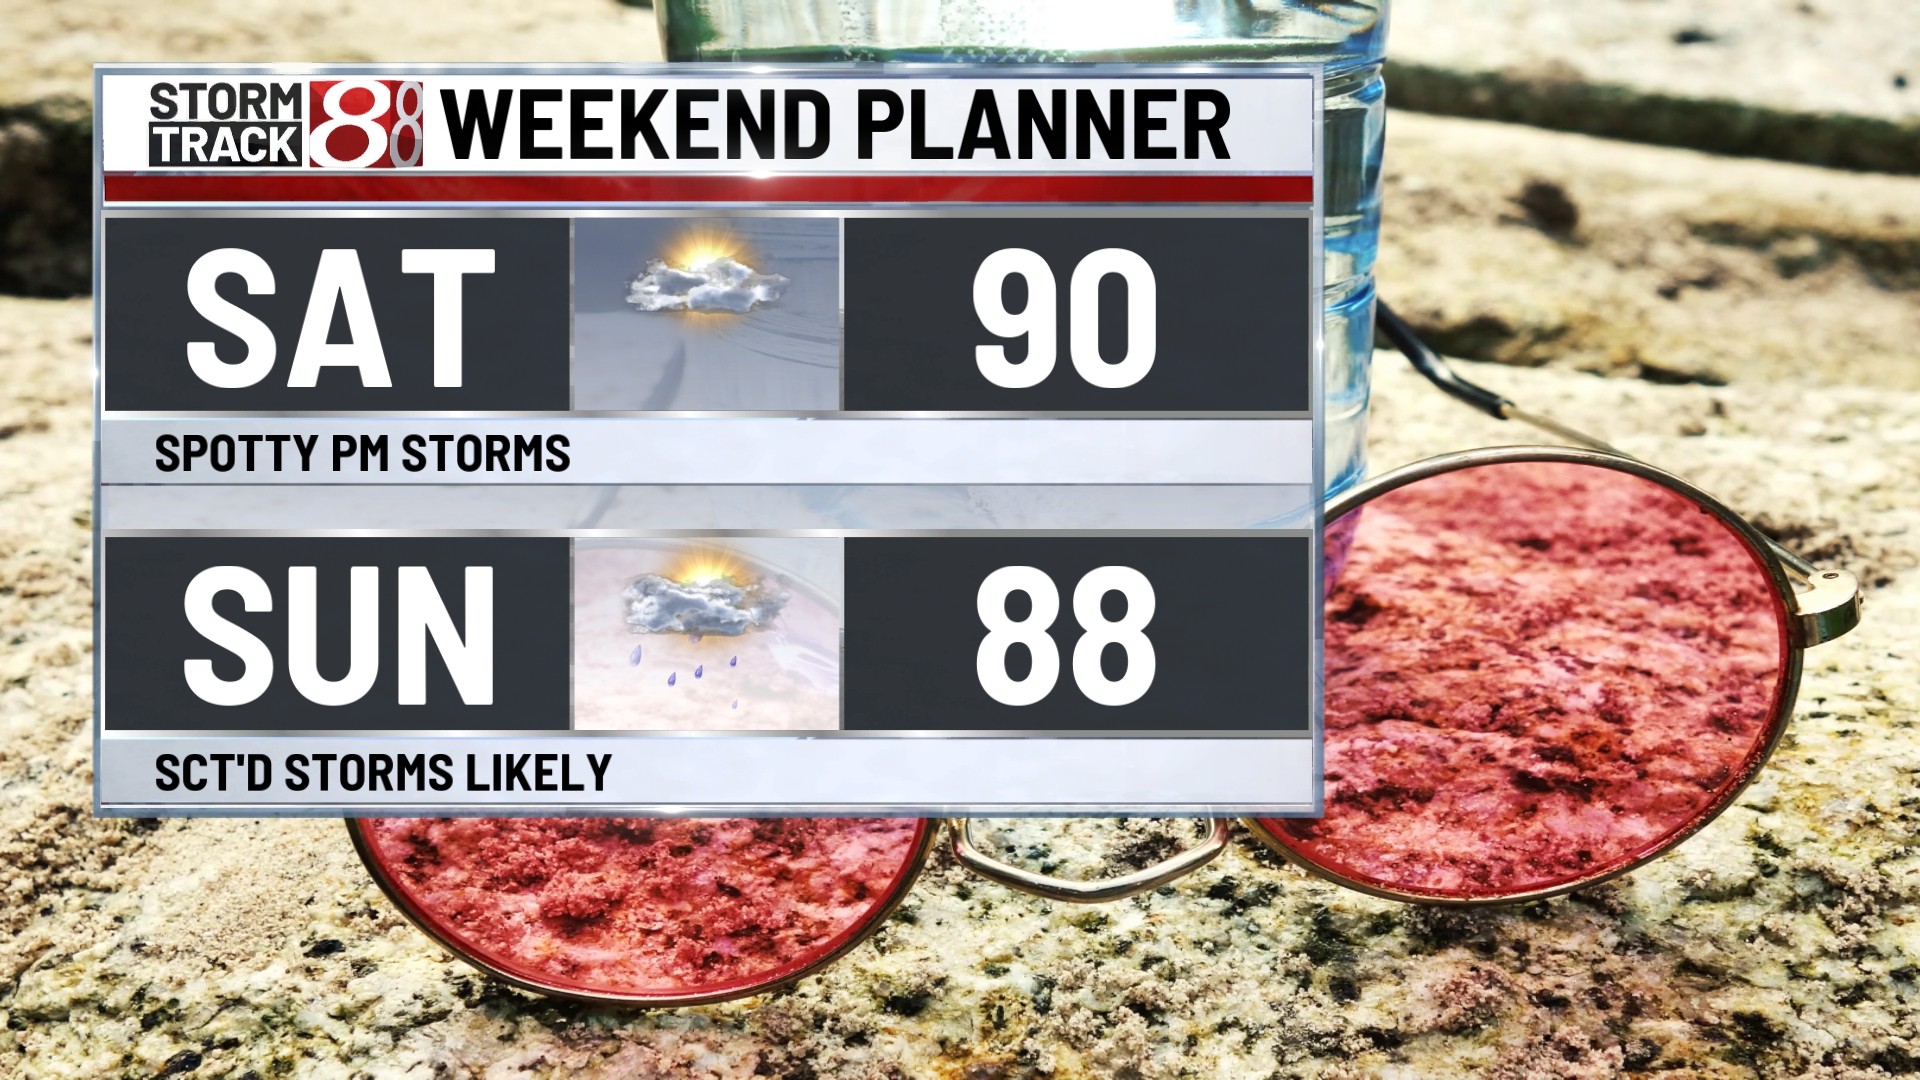 Hot and humid with severe storms possible this weekend